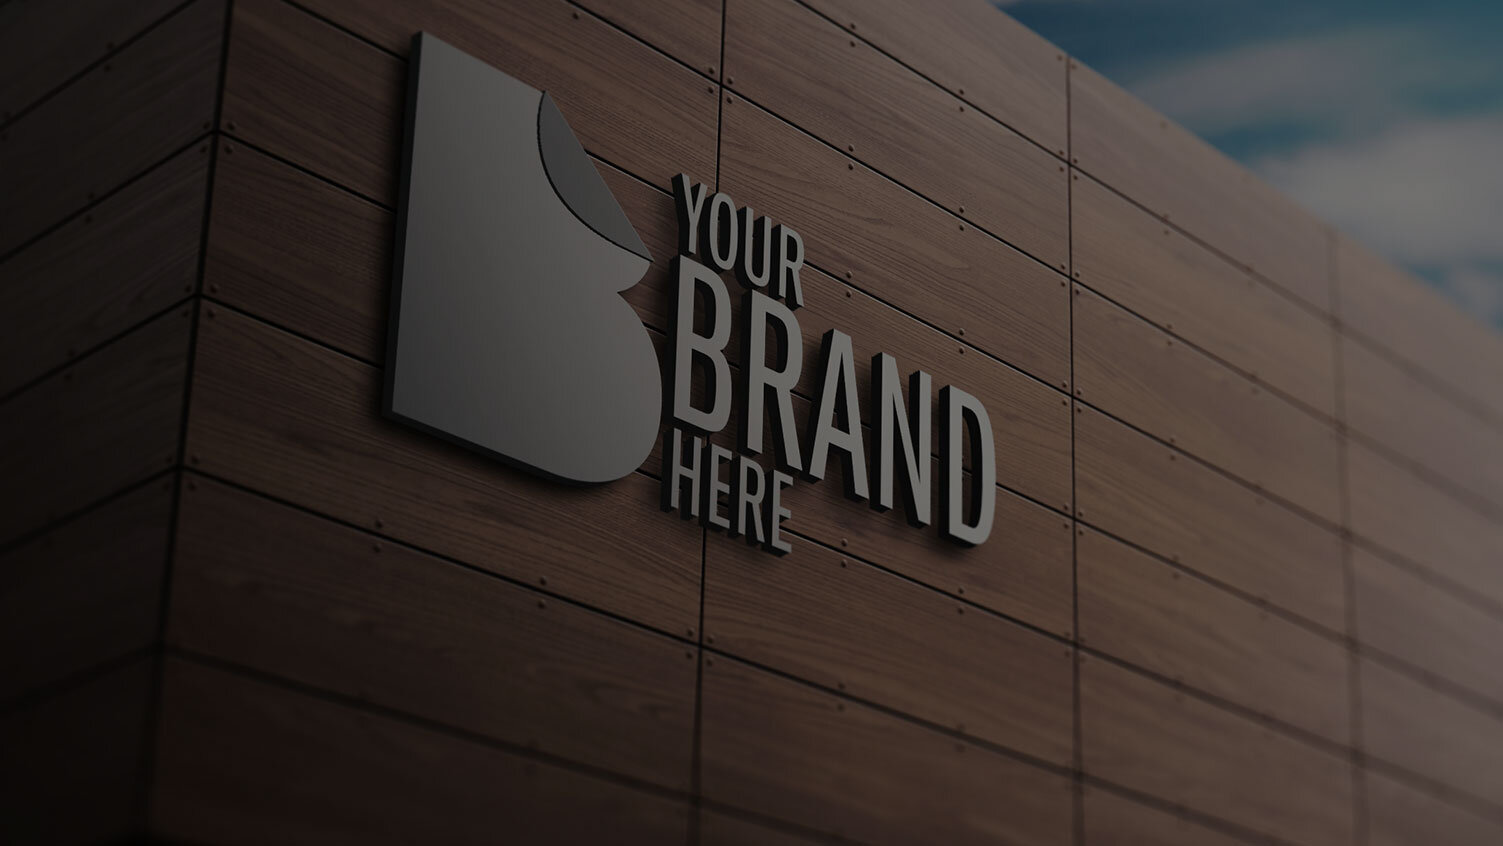 Building Brand Equity